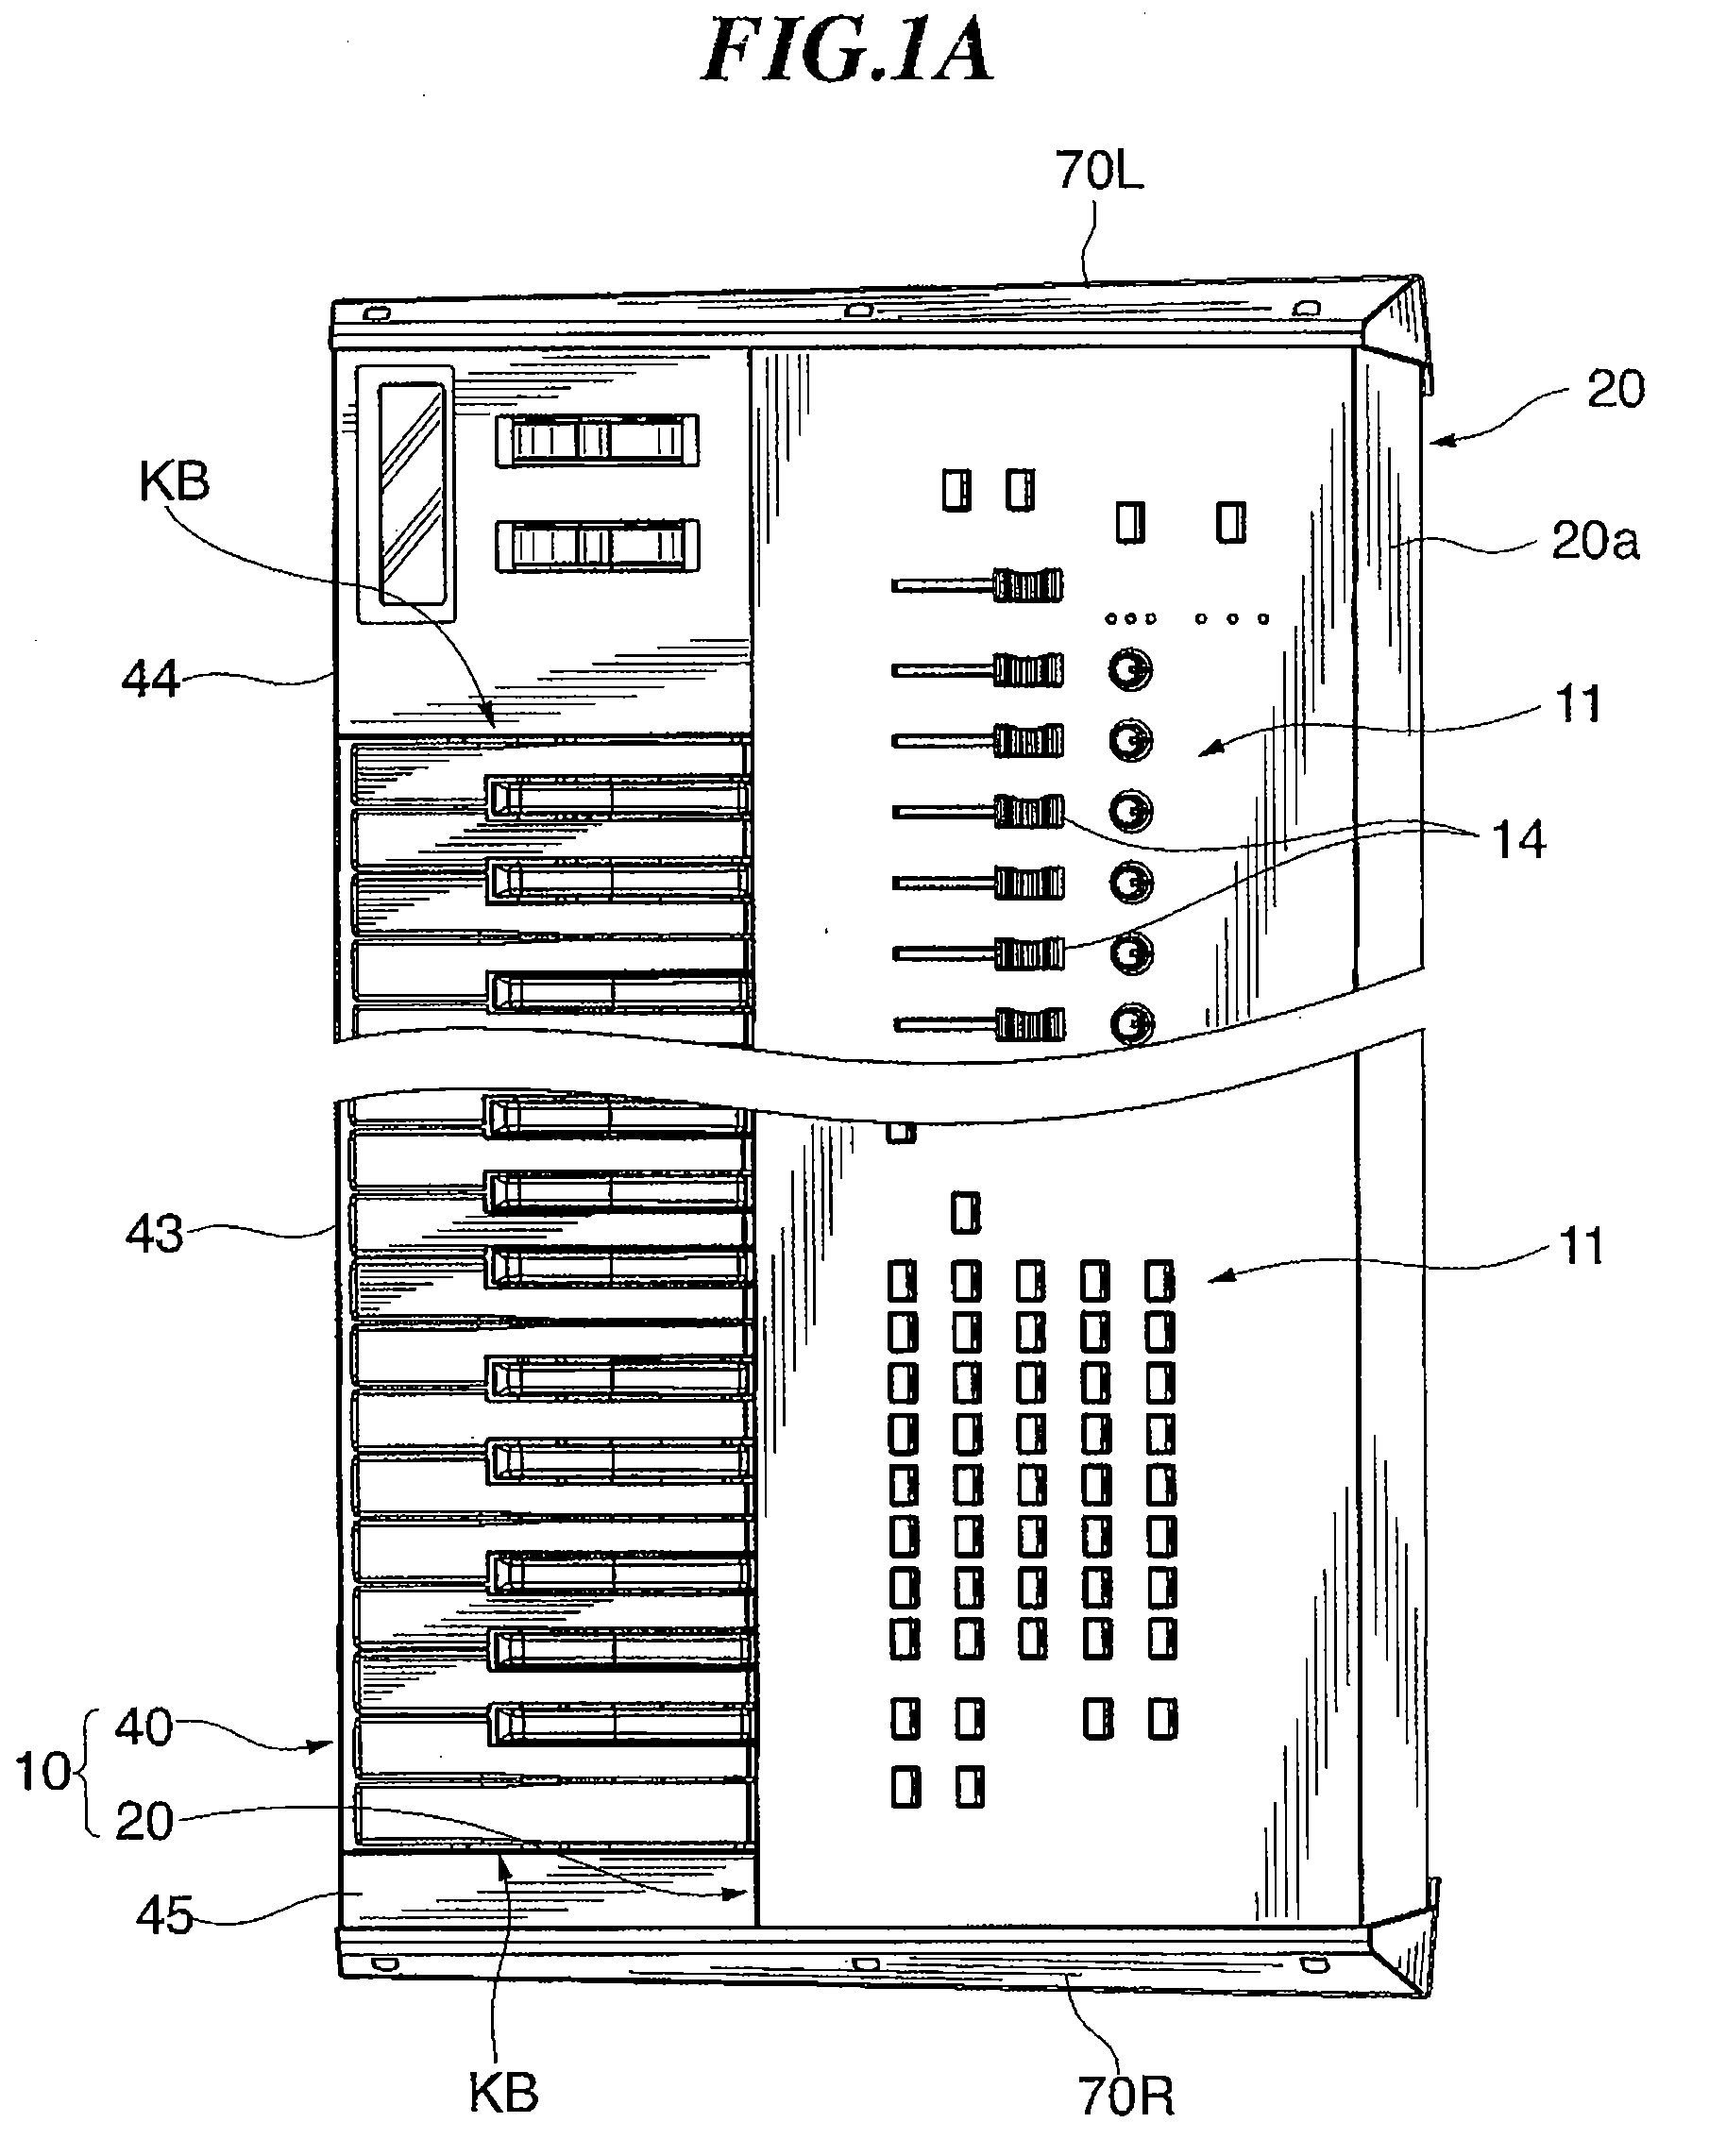 Housing Structure of Electronic Keyboard Musical Instrument